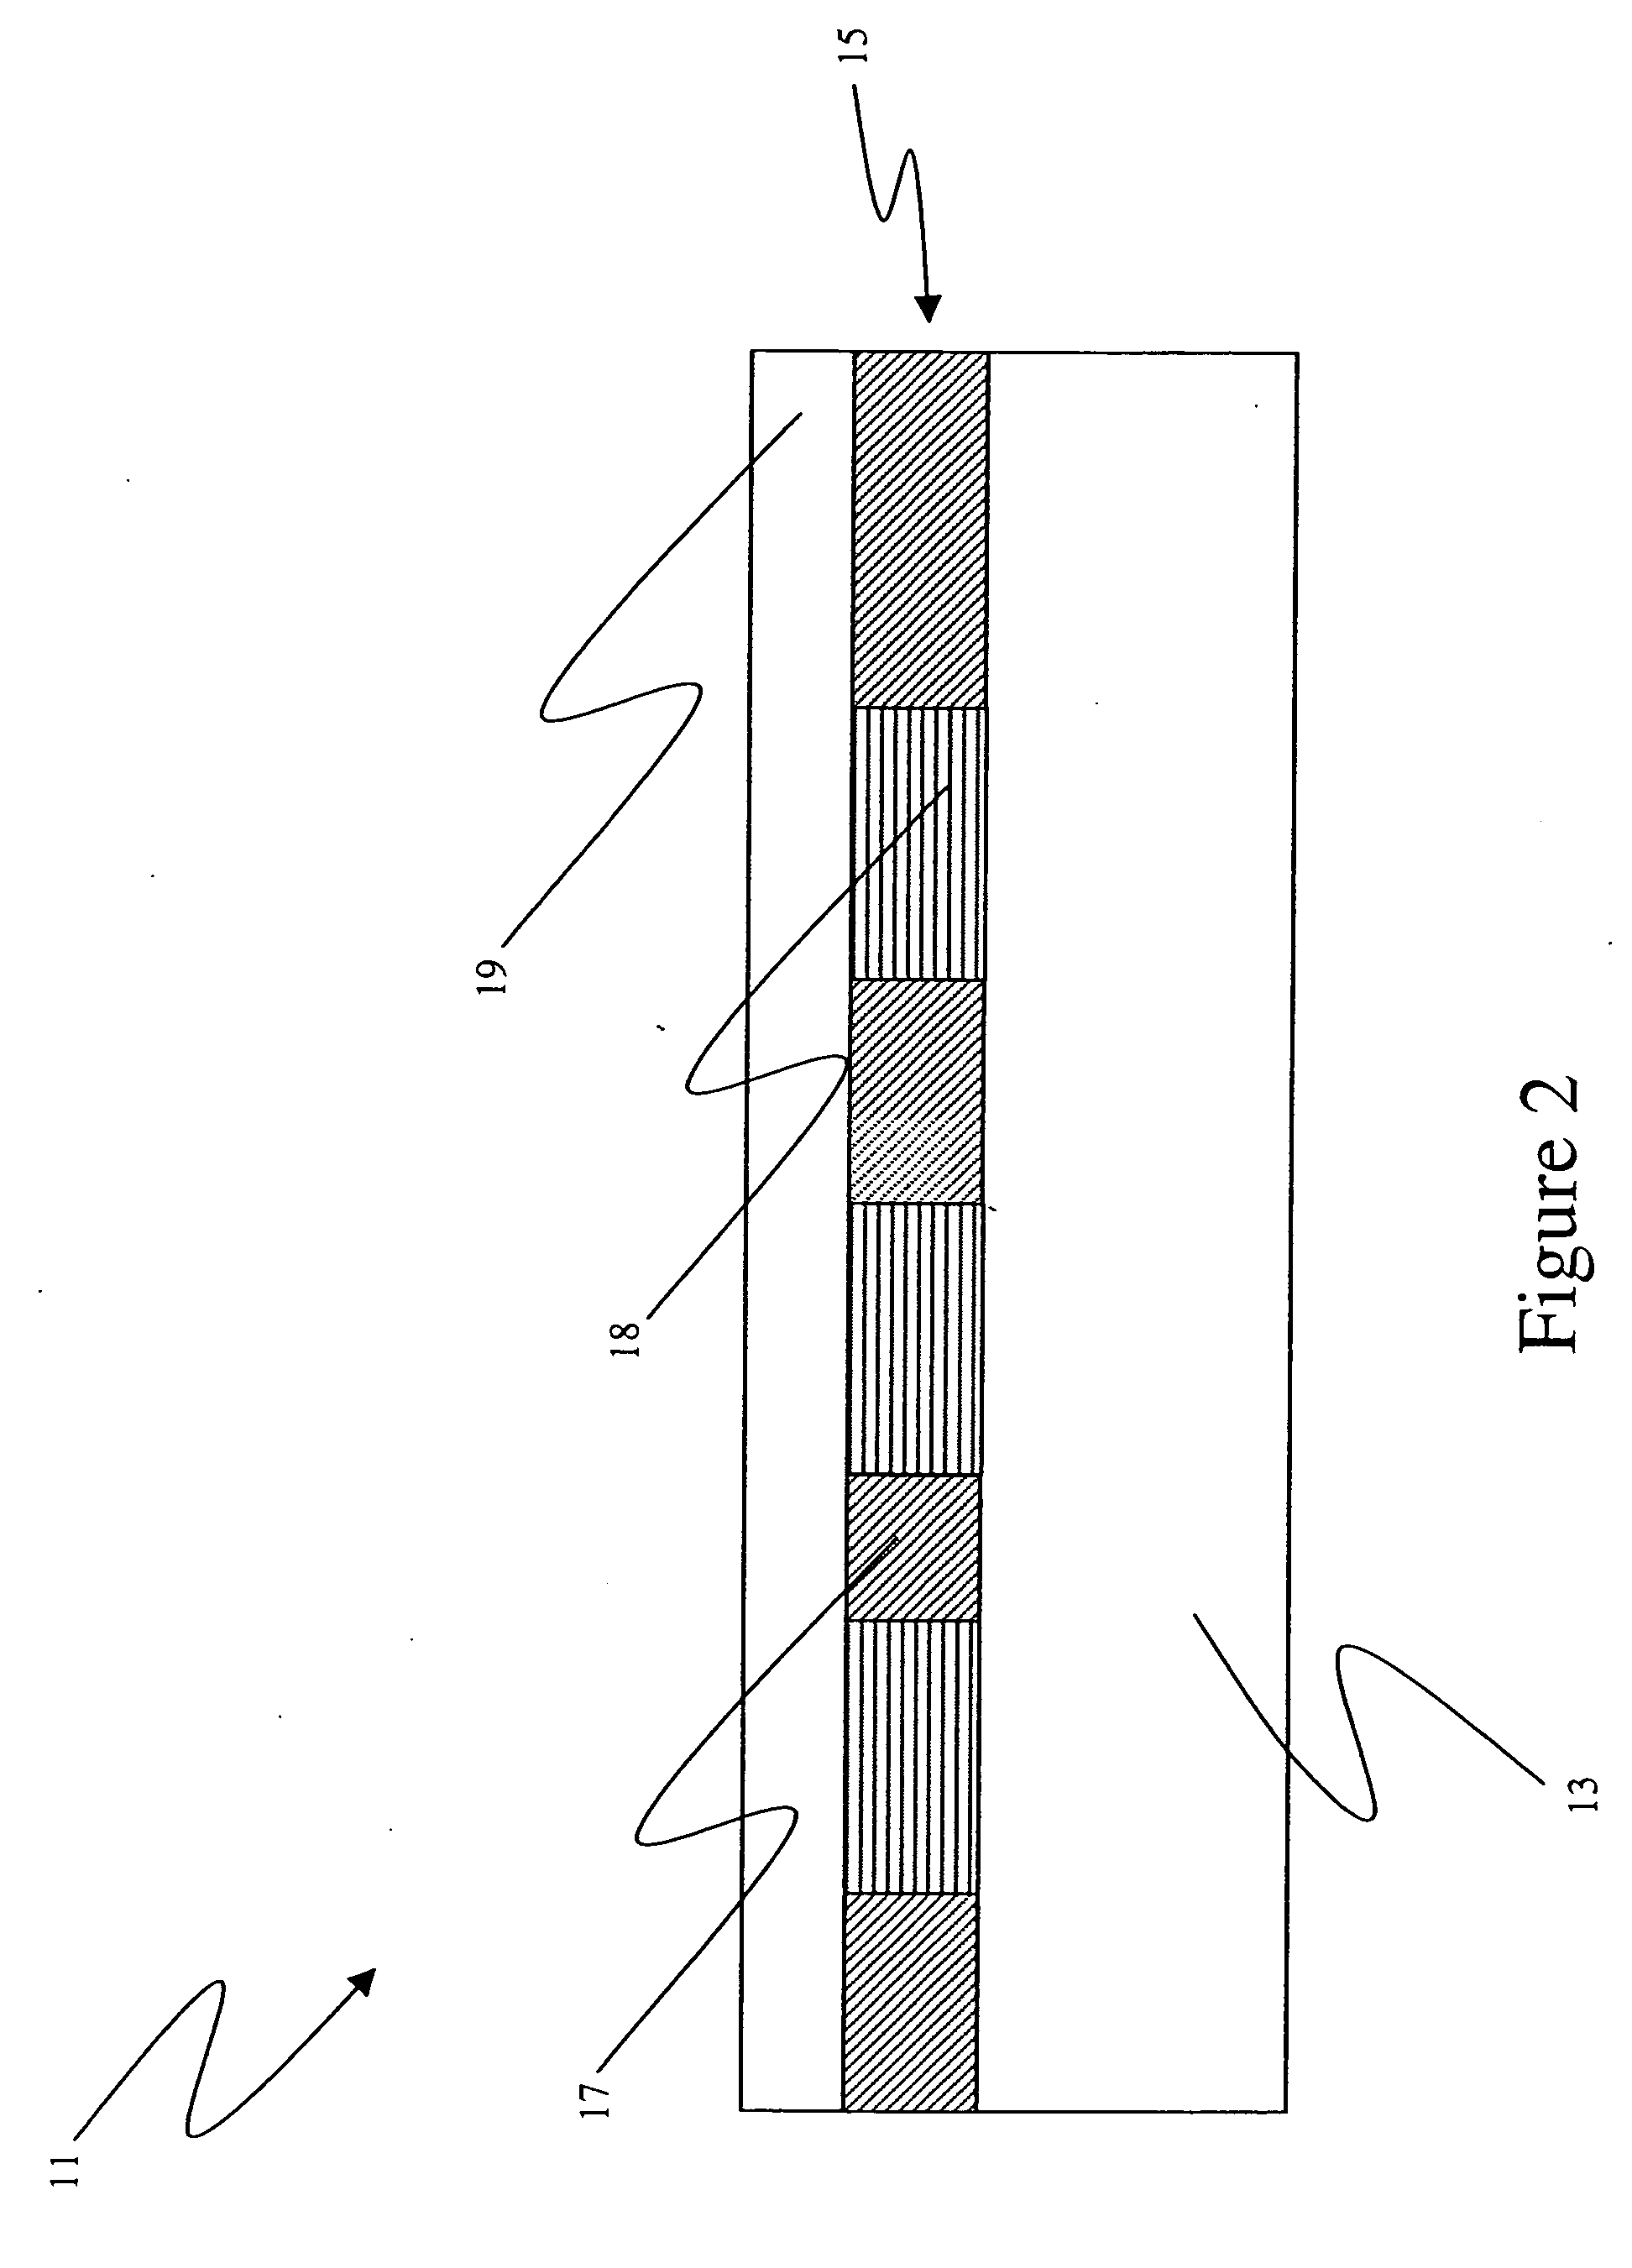 Metal and metal oxide patterned device